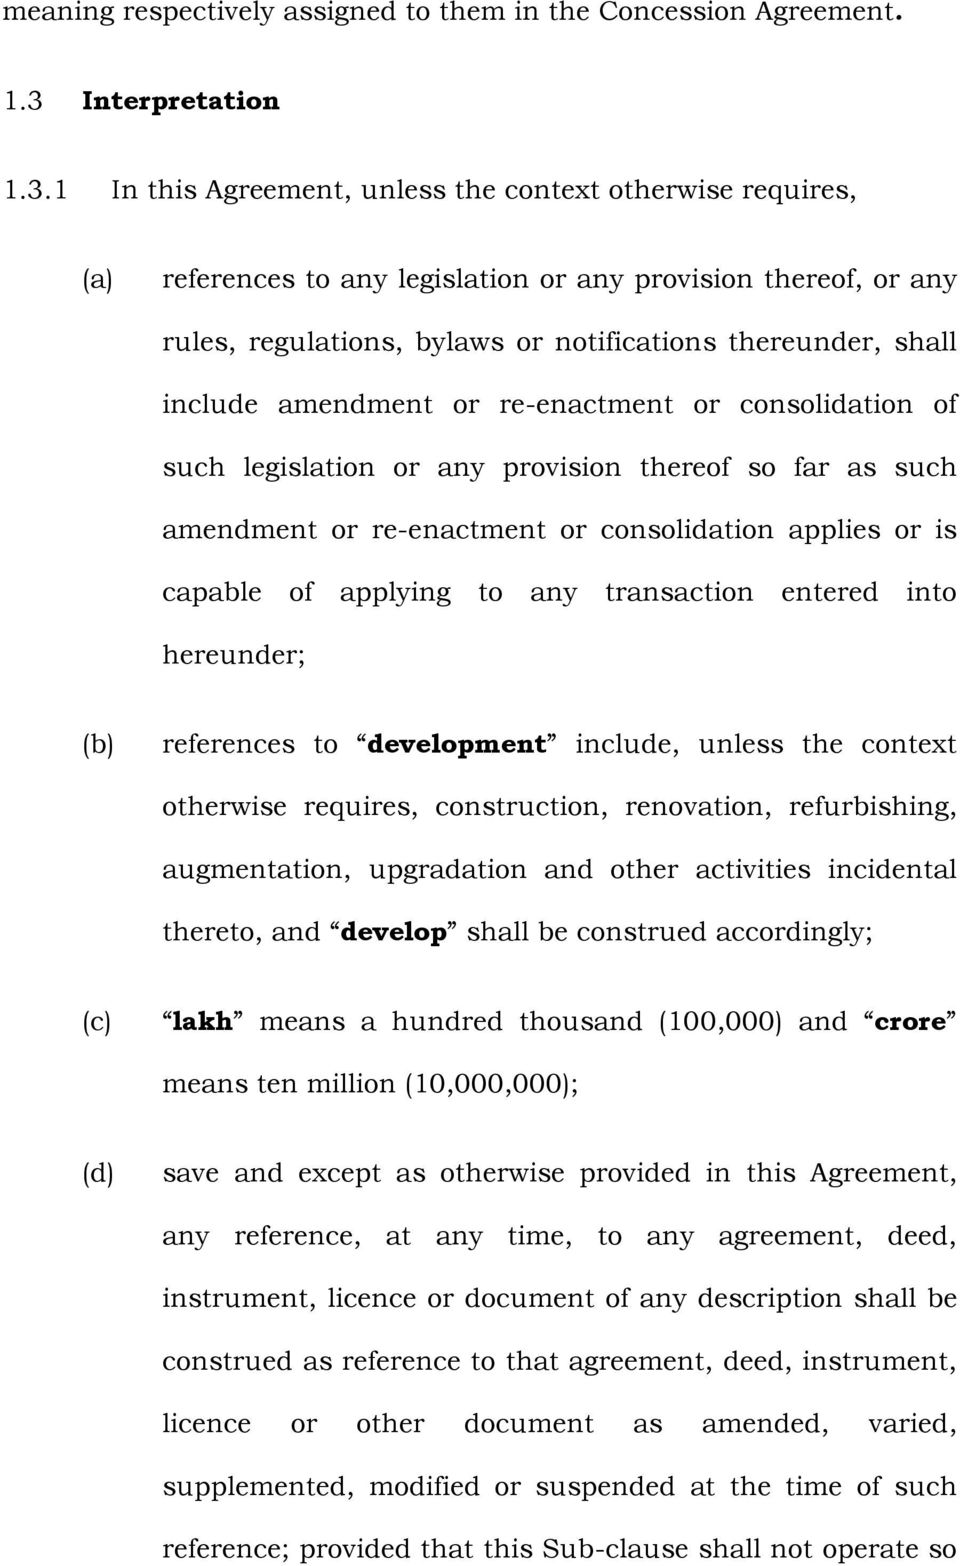 1 In this Agreement, unless the context otherwise requires, (a) references to any legislation or any provision thereof, or any rules, regulations, bylaws or notifications thereunder, shall include